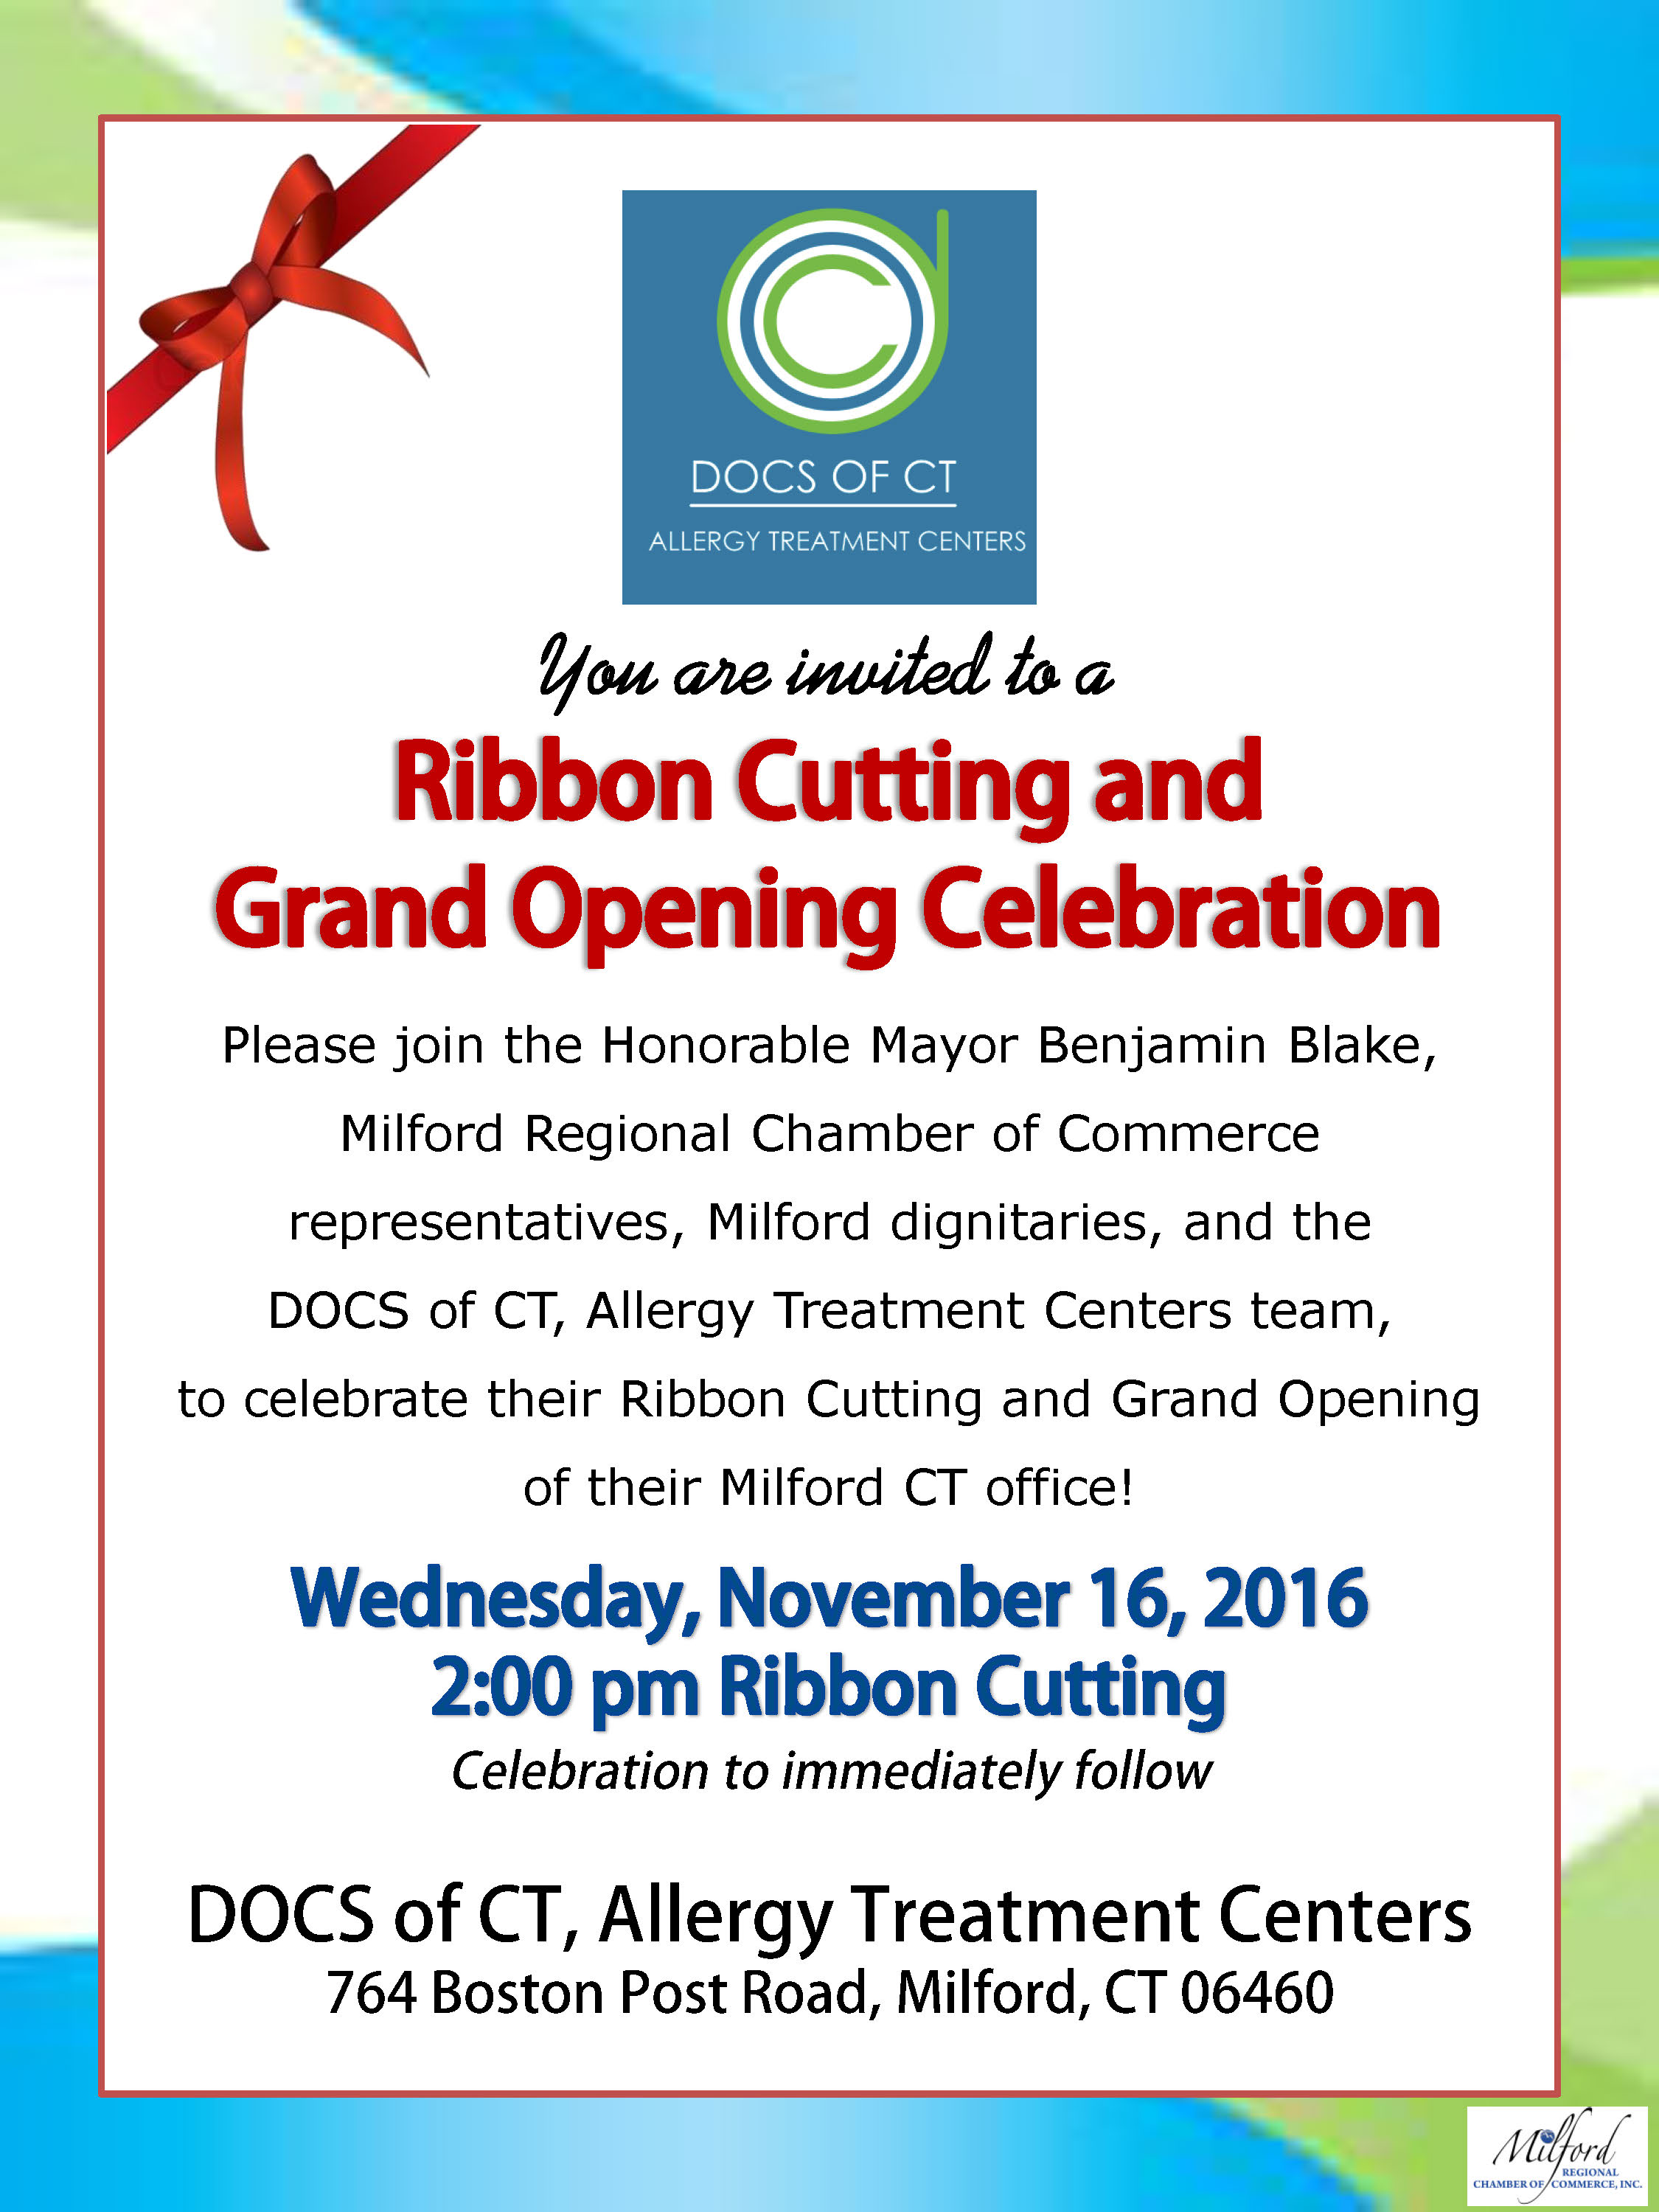 Ribbon Cutting - DOCS of CT, Allergy Treatment Centers